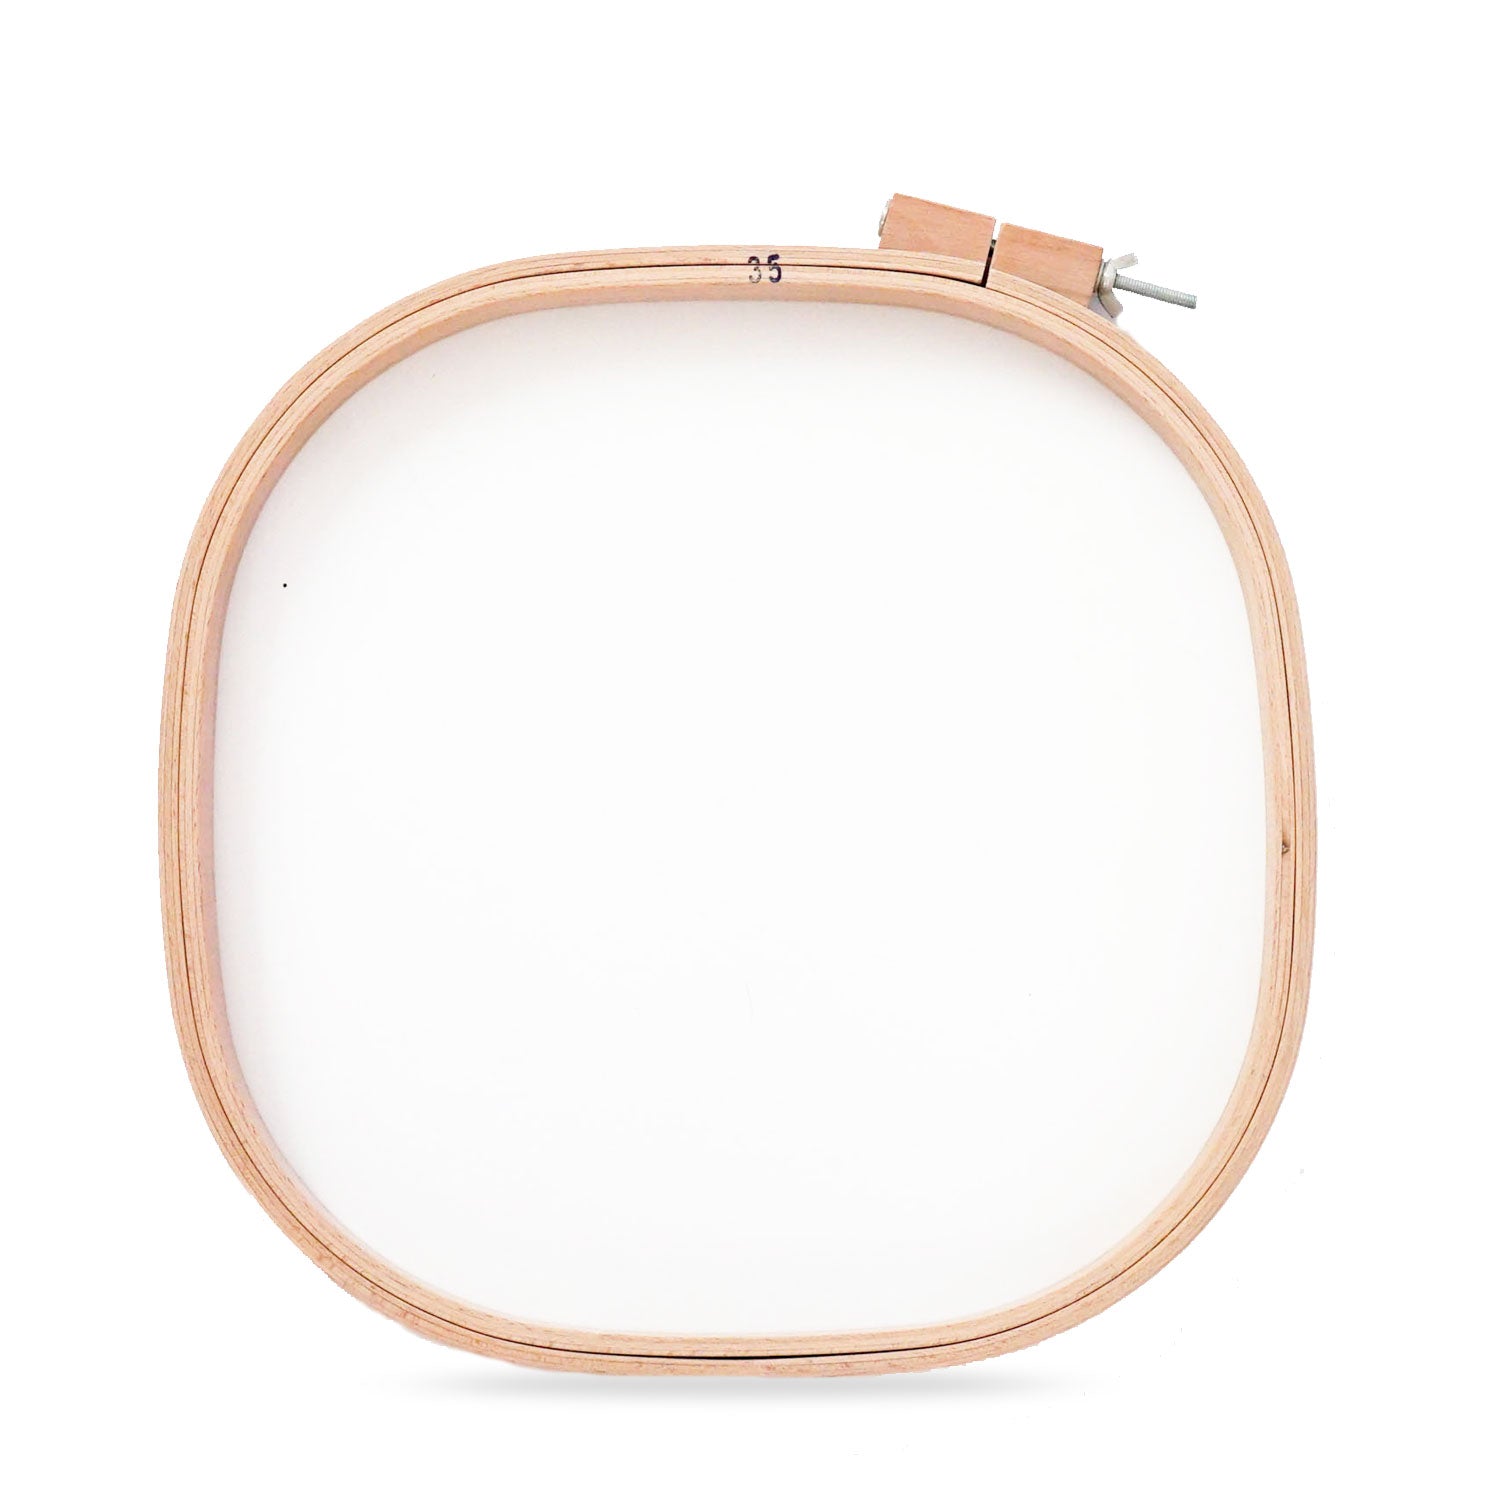 UNIQUE Embroidery Hoops, Square